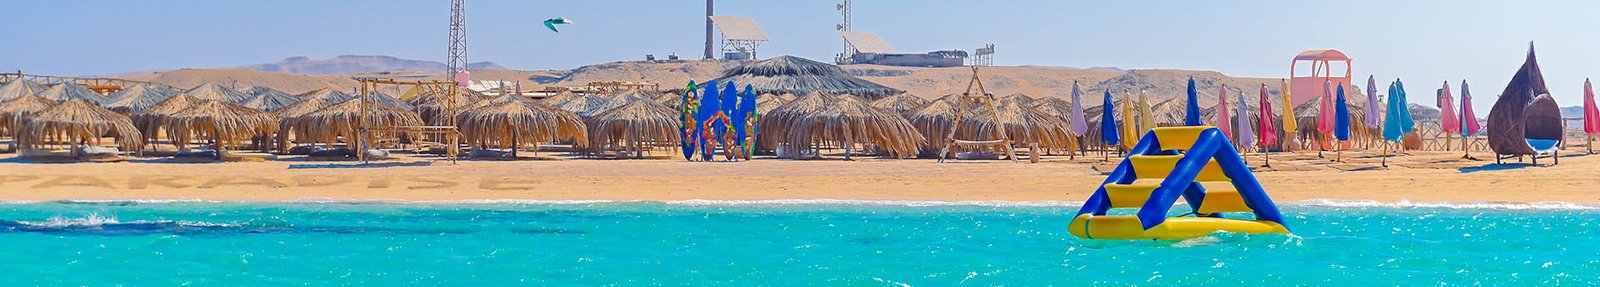 Paradise Island Hurghada Booking and Prices